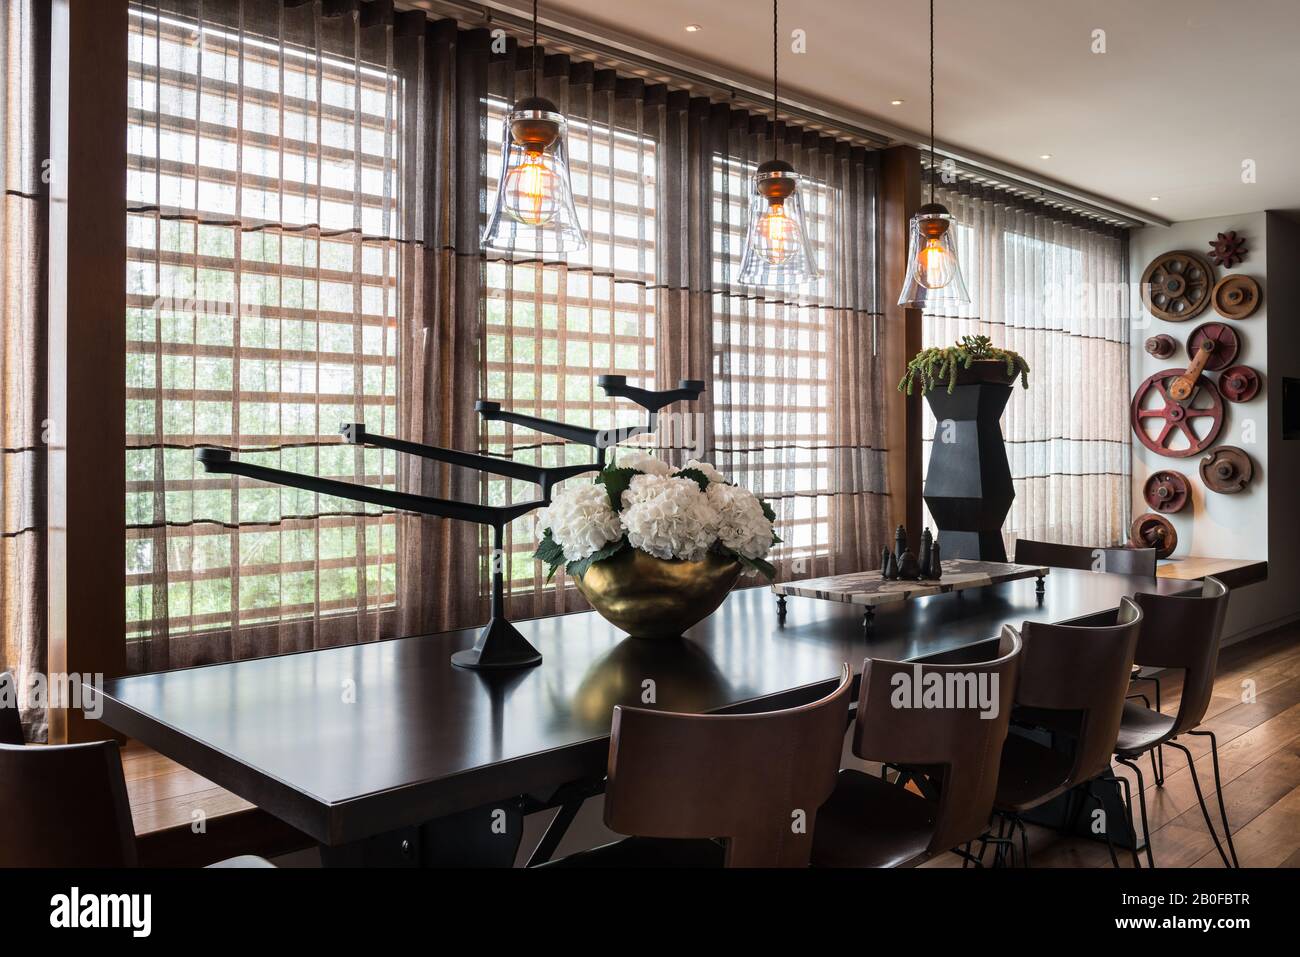 Glass pendant lights above dining table with hydrangea in copper vase Stock Photo